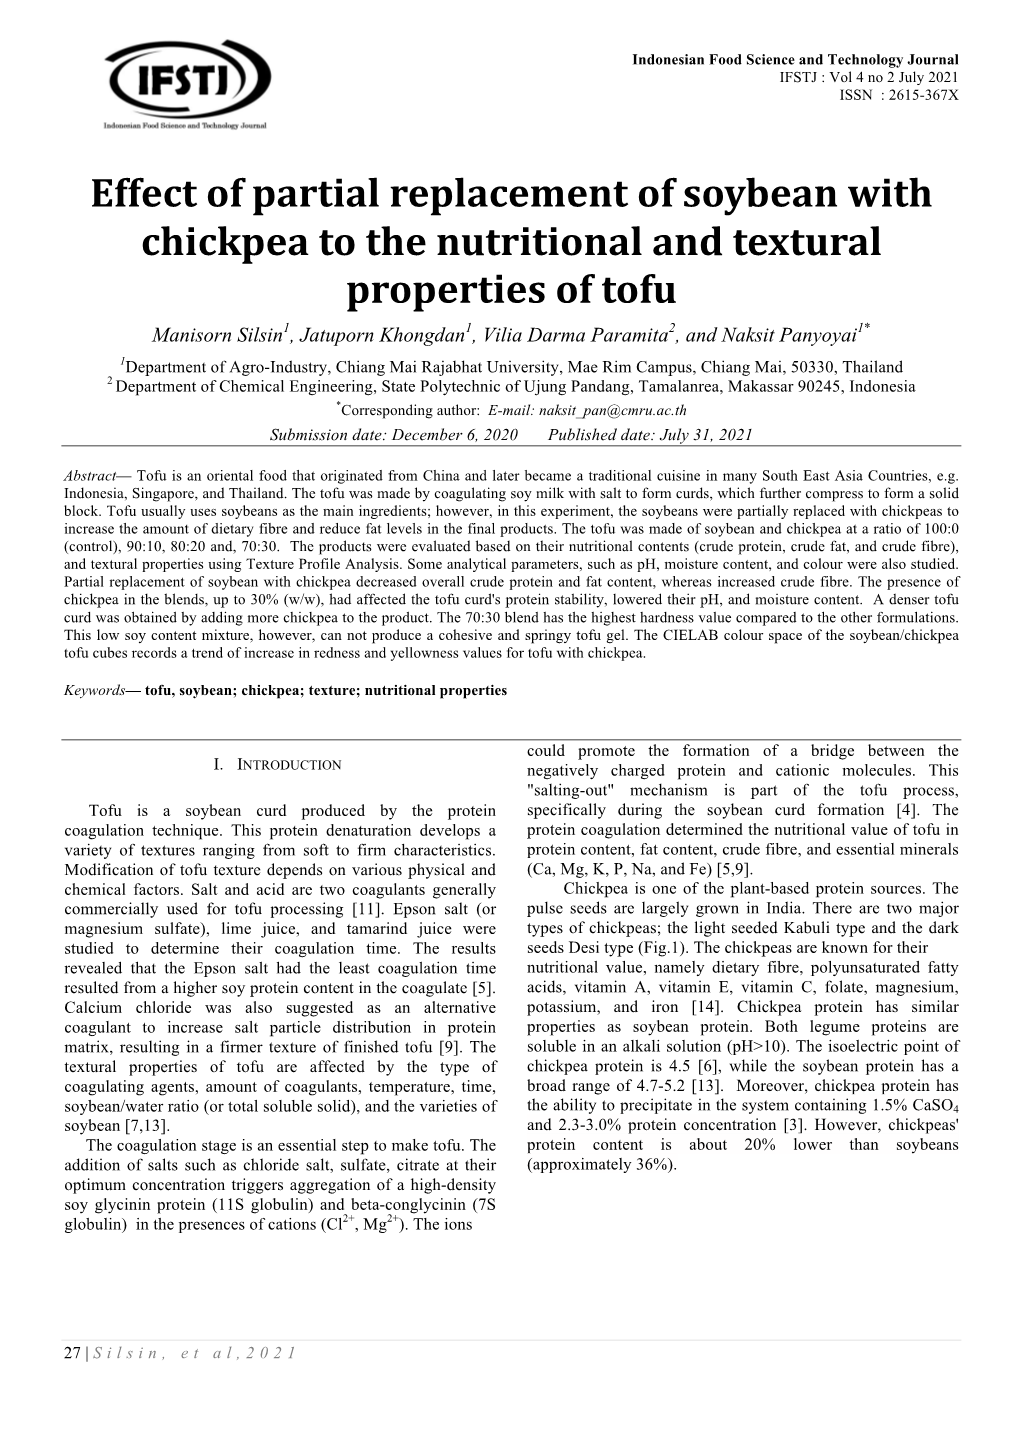 Effect of Partial Replacement of Soybean with Chickpea to the Nutritional and Textural Properties of Tofu